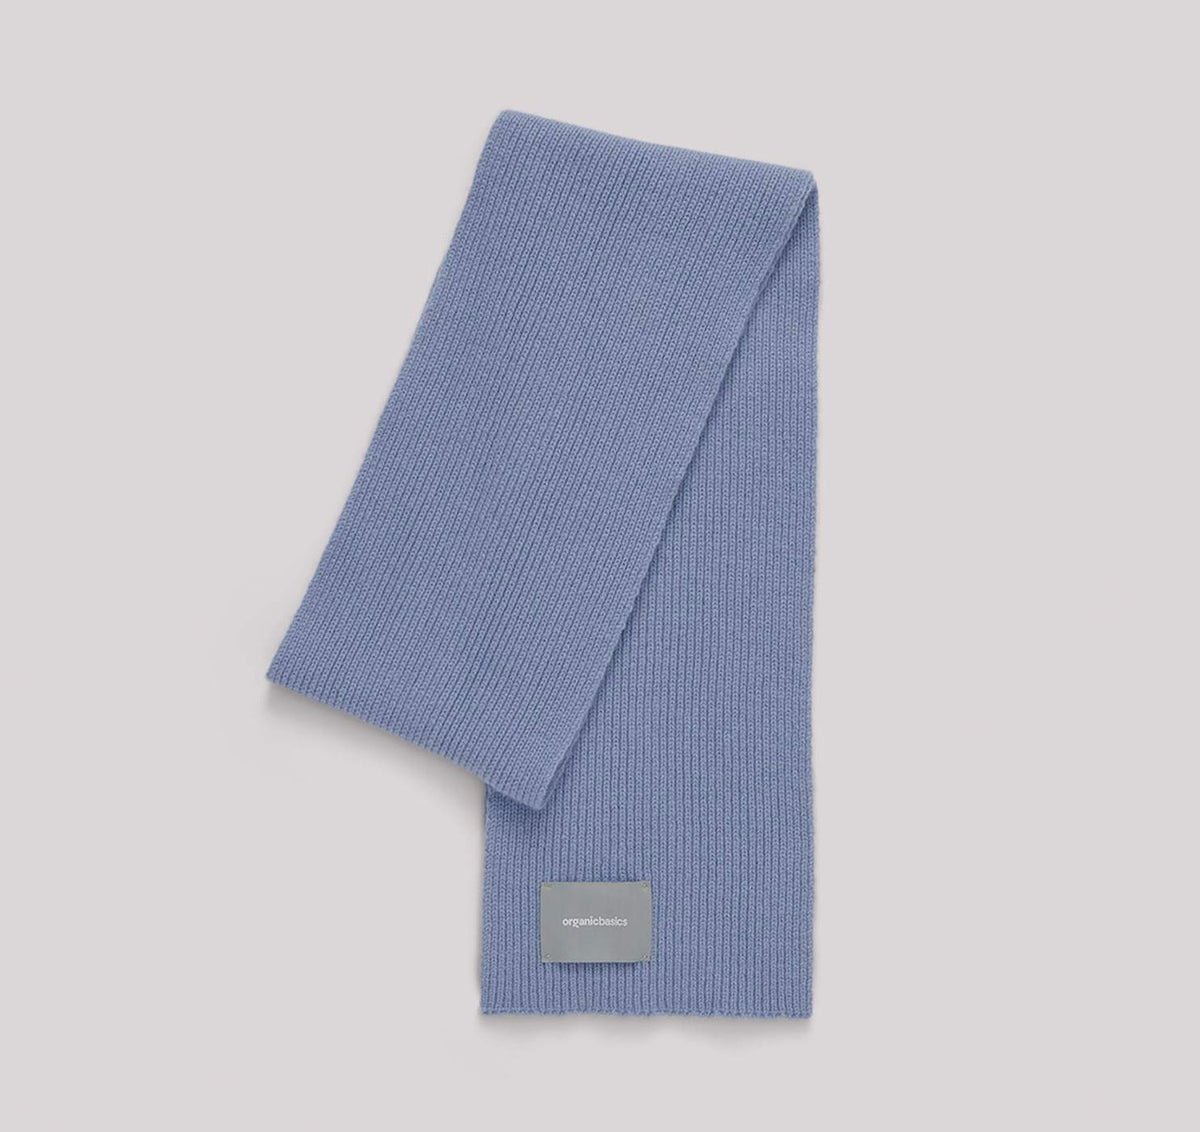 An Organic Basics Recycled Wool Scarf – Light Blue on a white background.